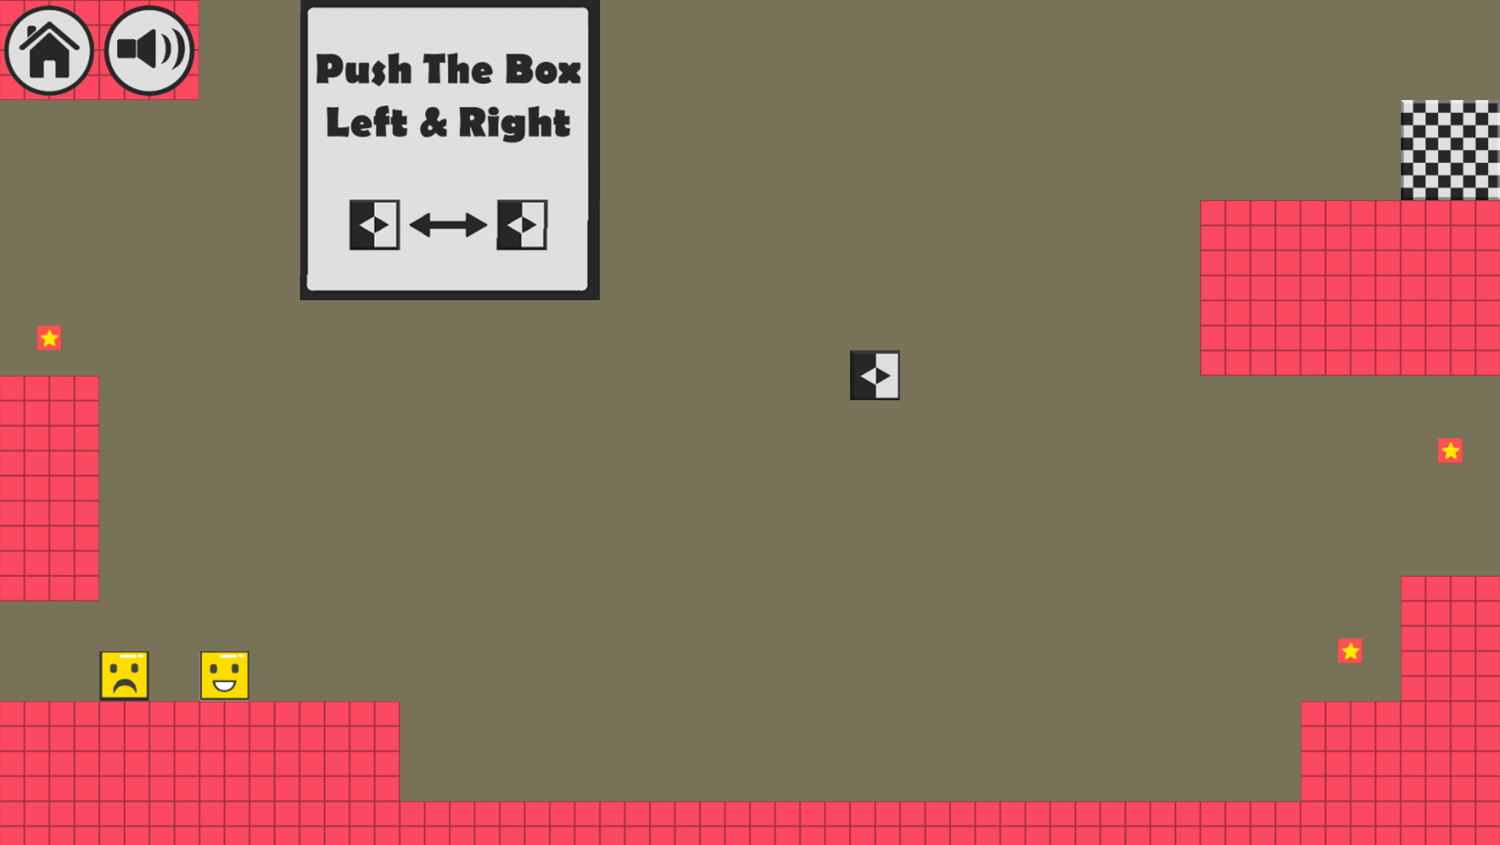 Emo Brothers Game Level With a Push Box Screenshot.